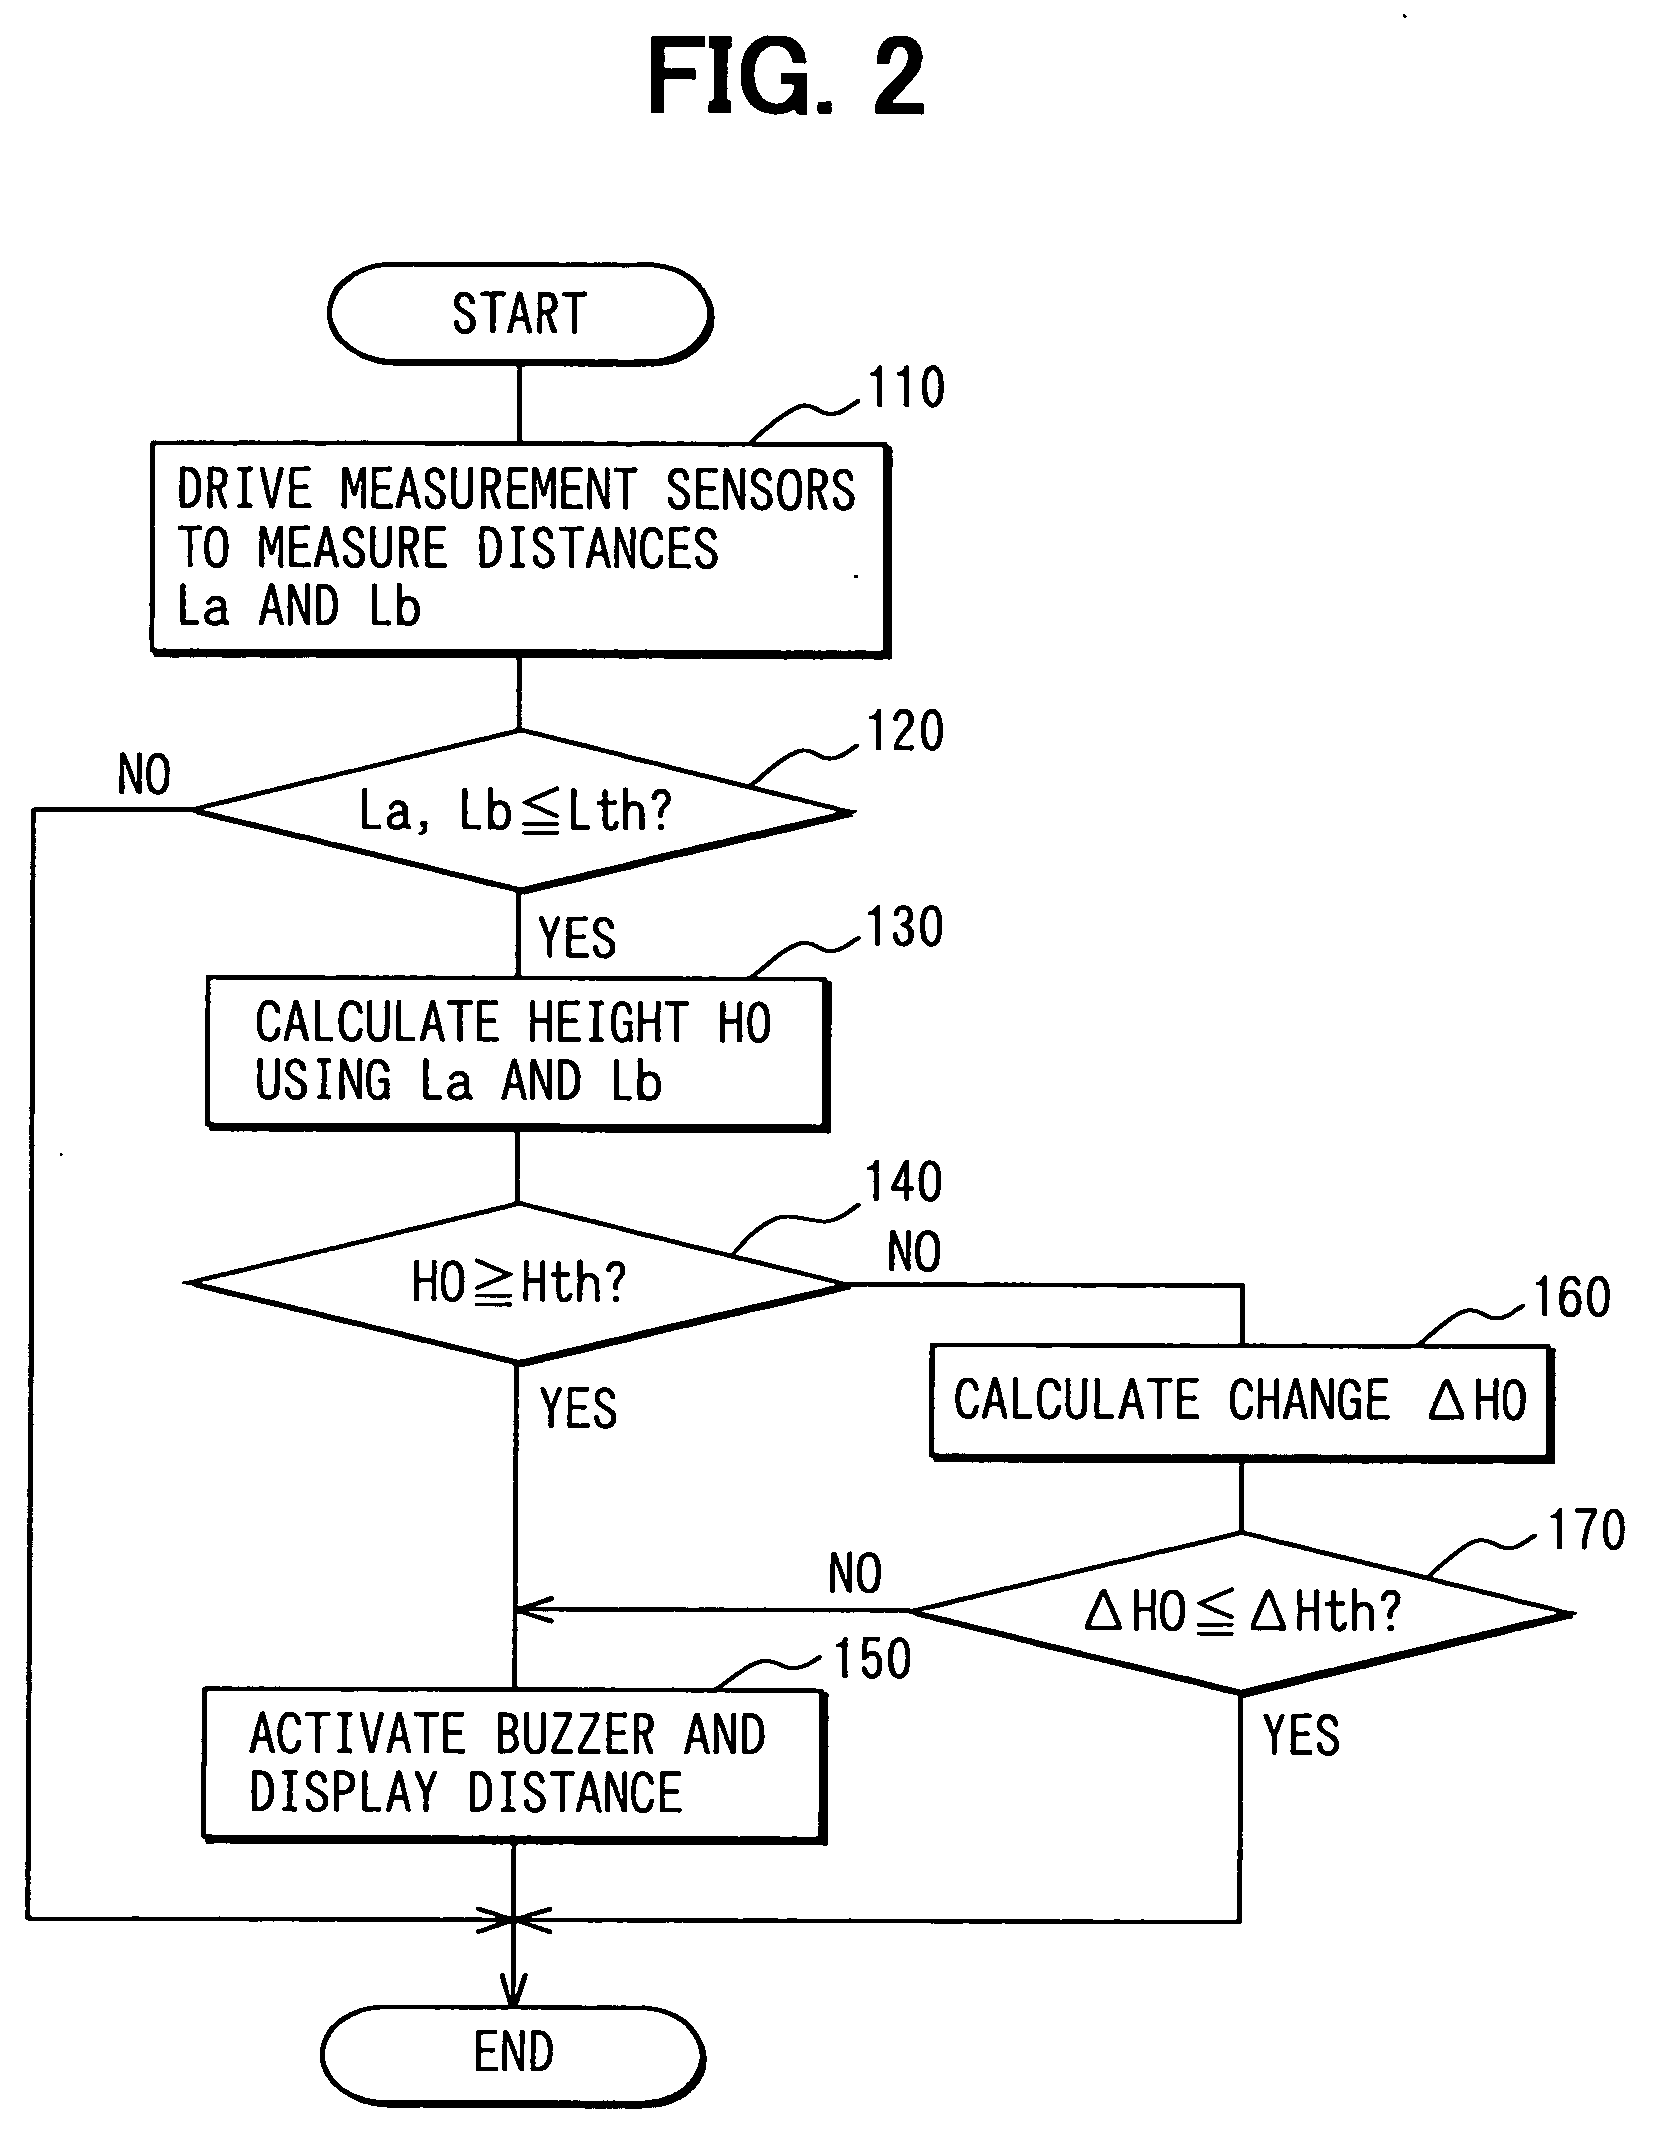 Driving assisting apparatus for vehicles